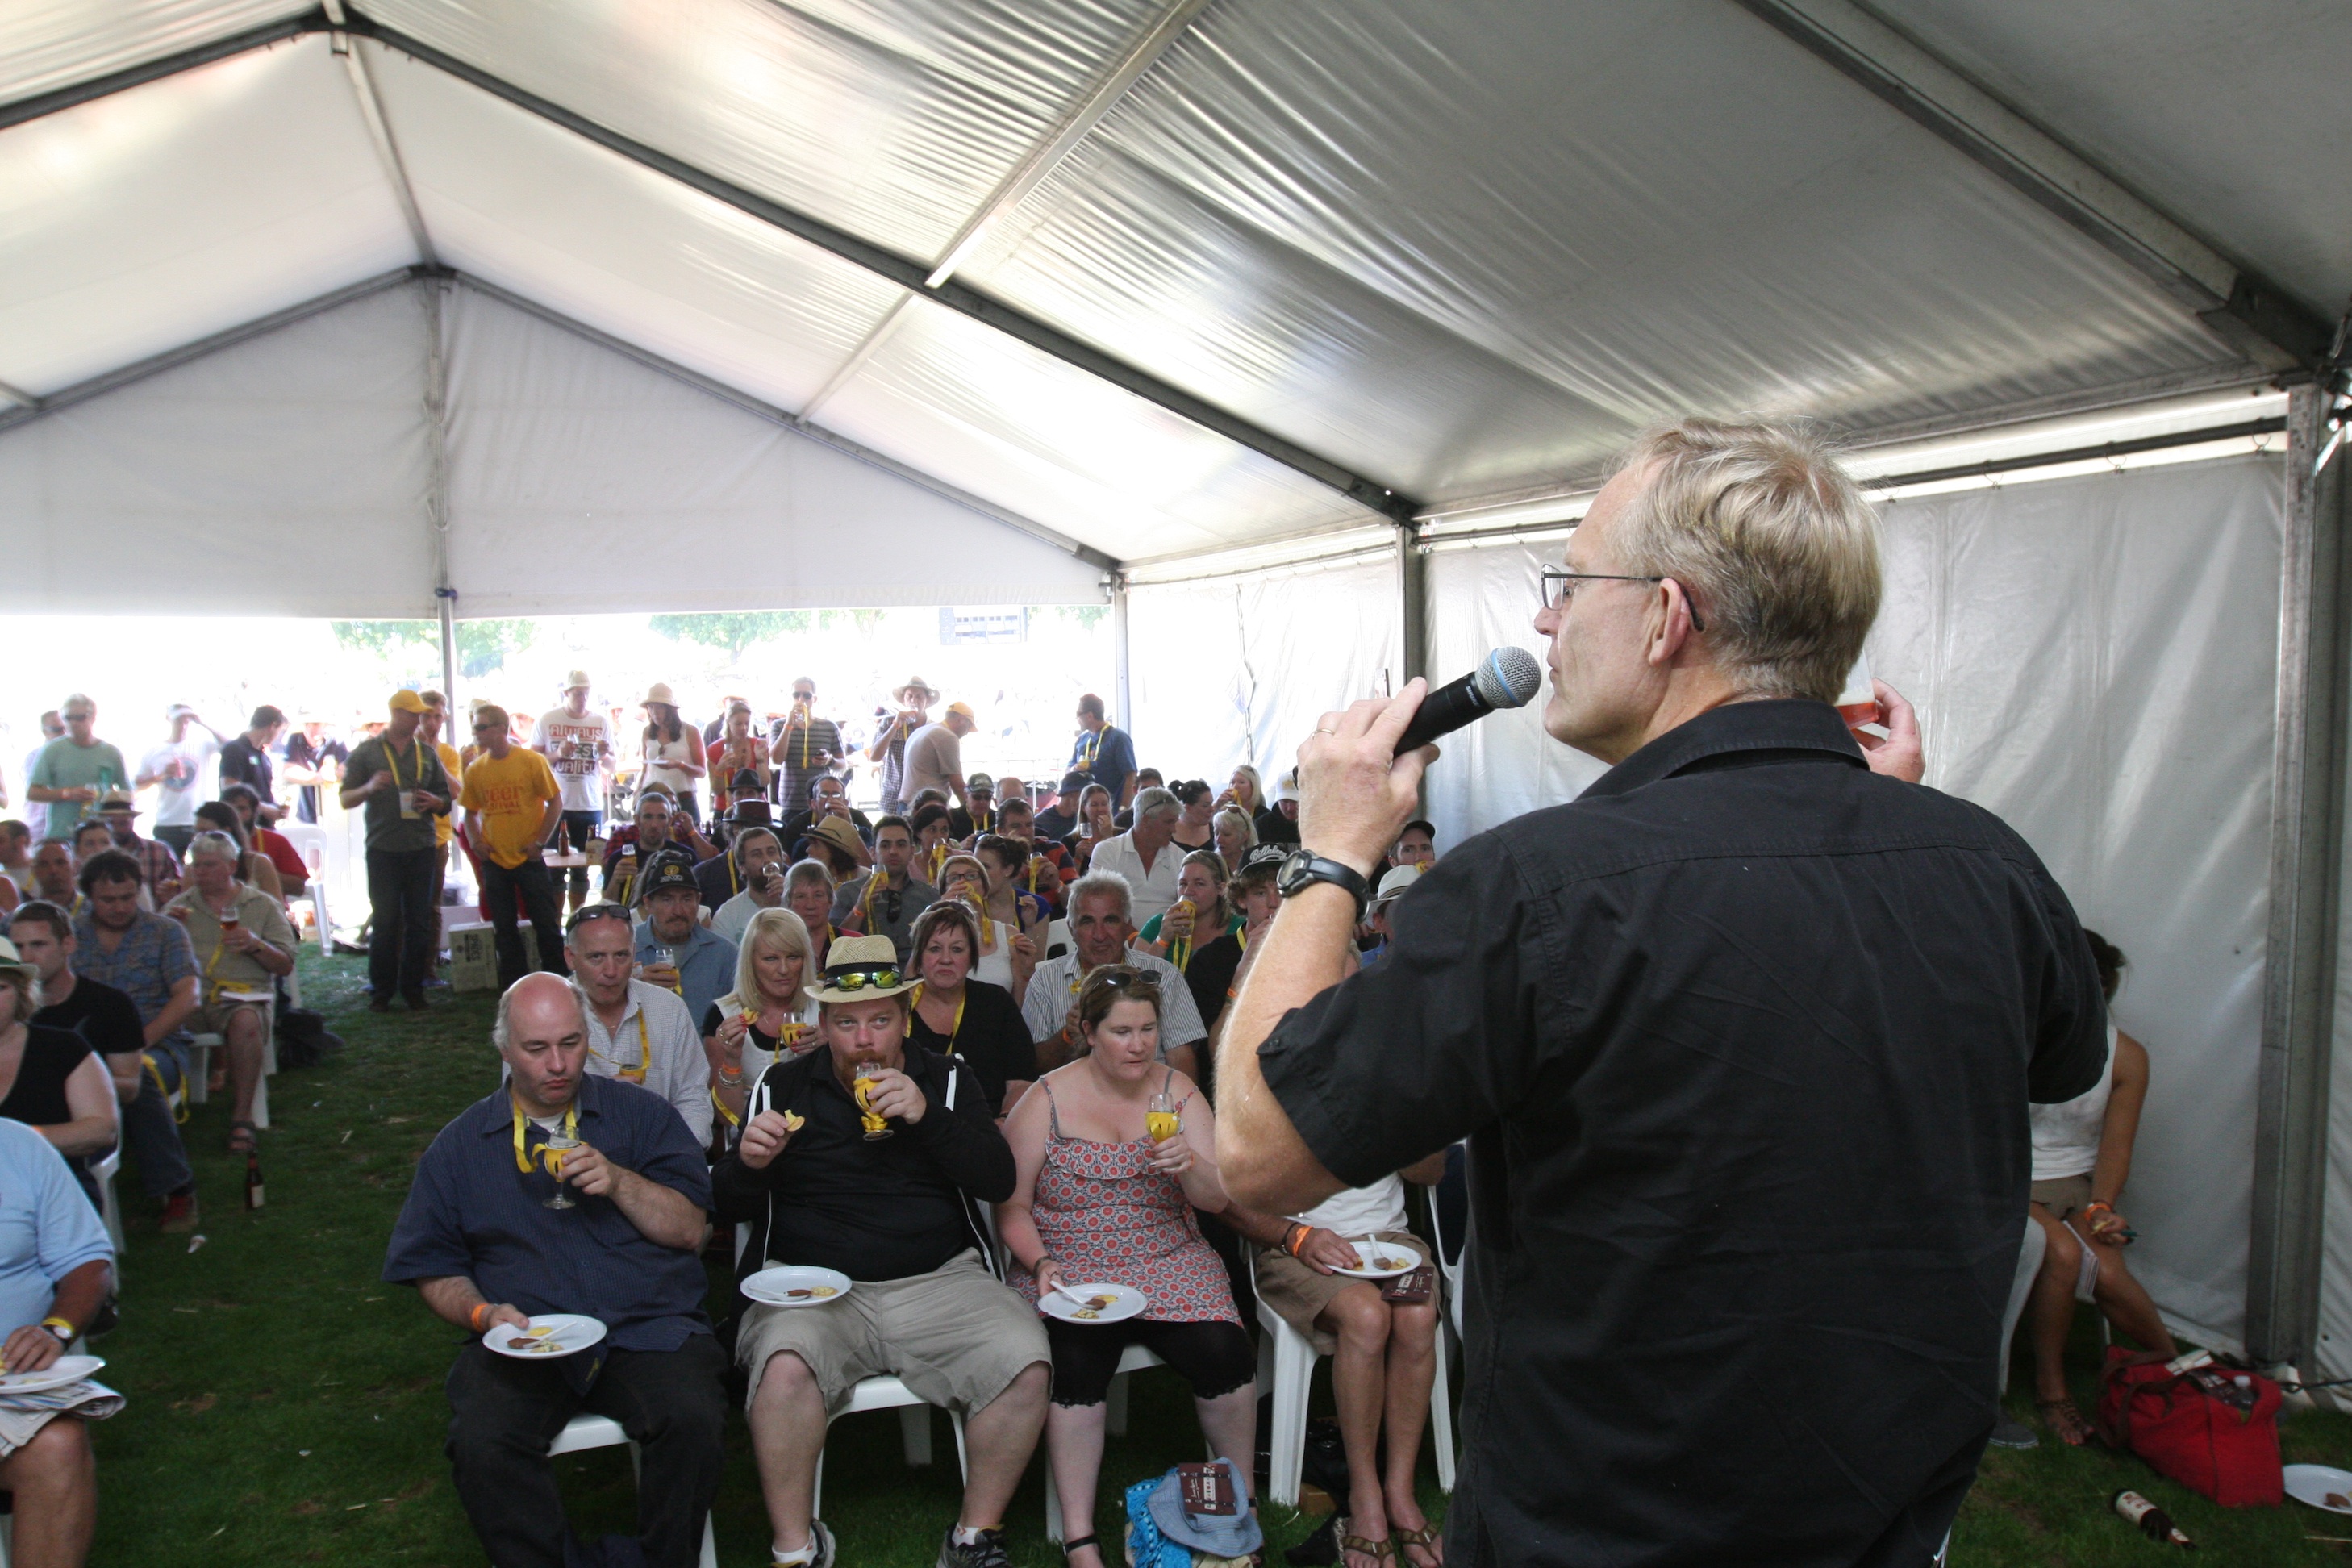 Chuck captures the crowd's attention with just a small plastic cup of James Squire Amber Ale.